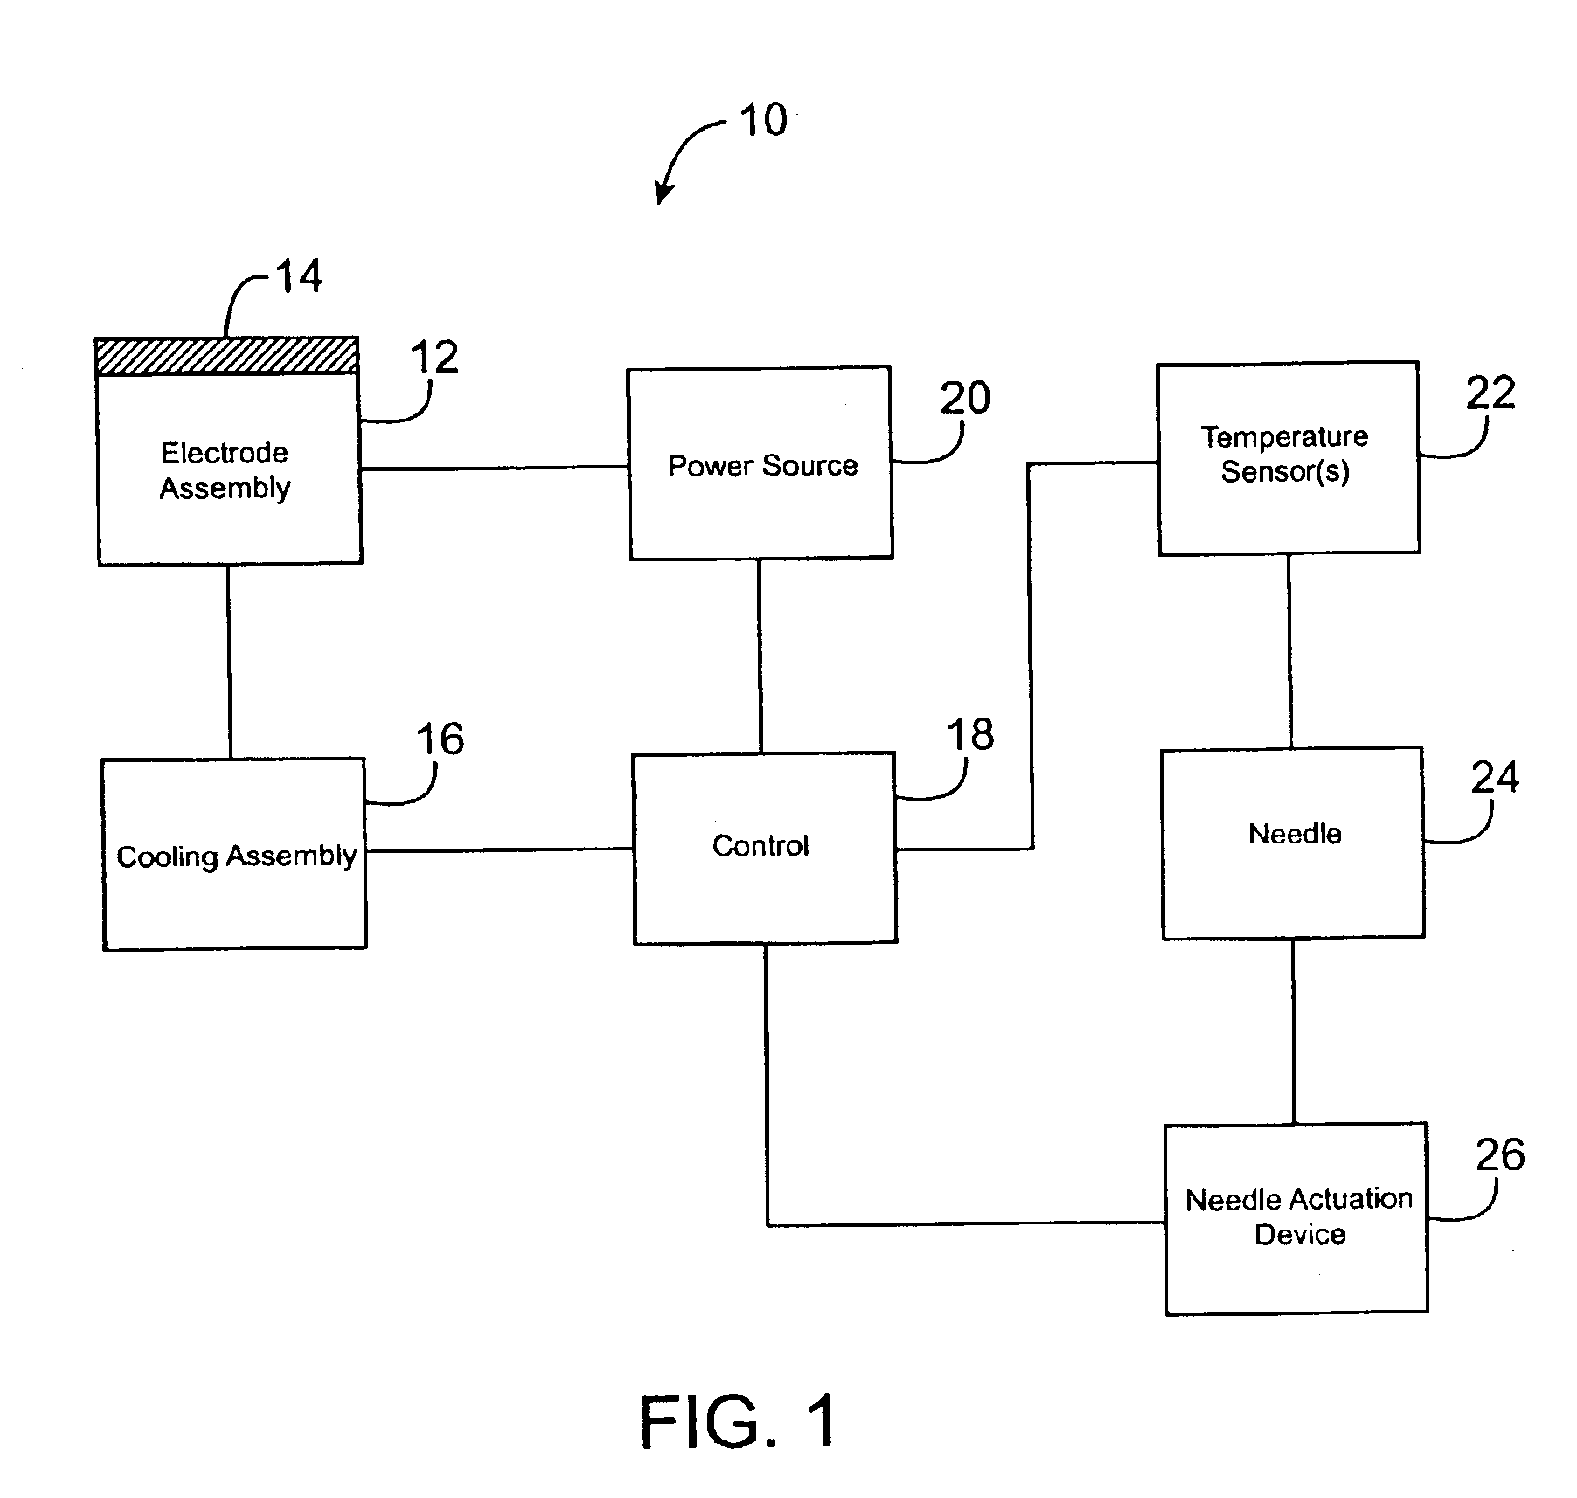 Needle deployment for temperature sensing from an electrode